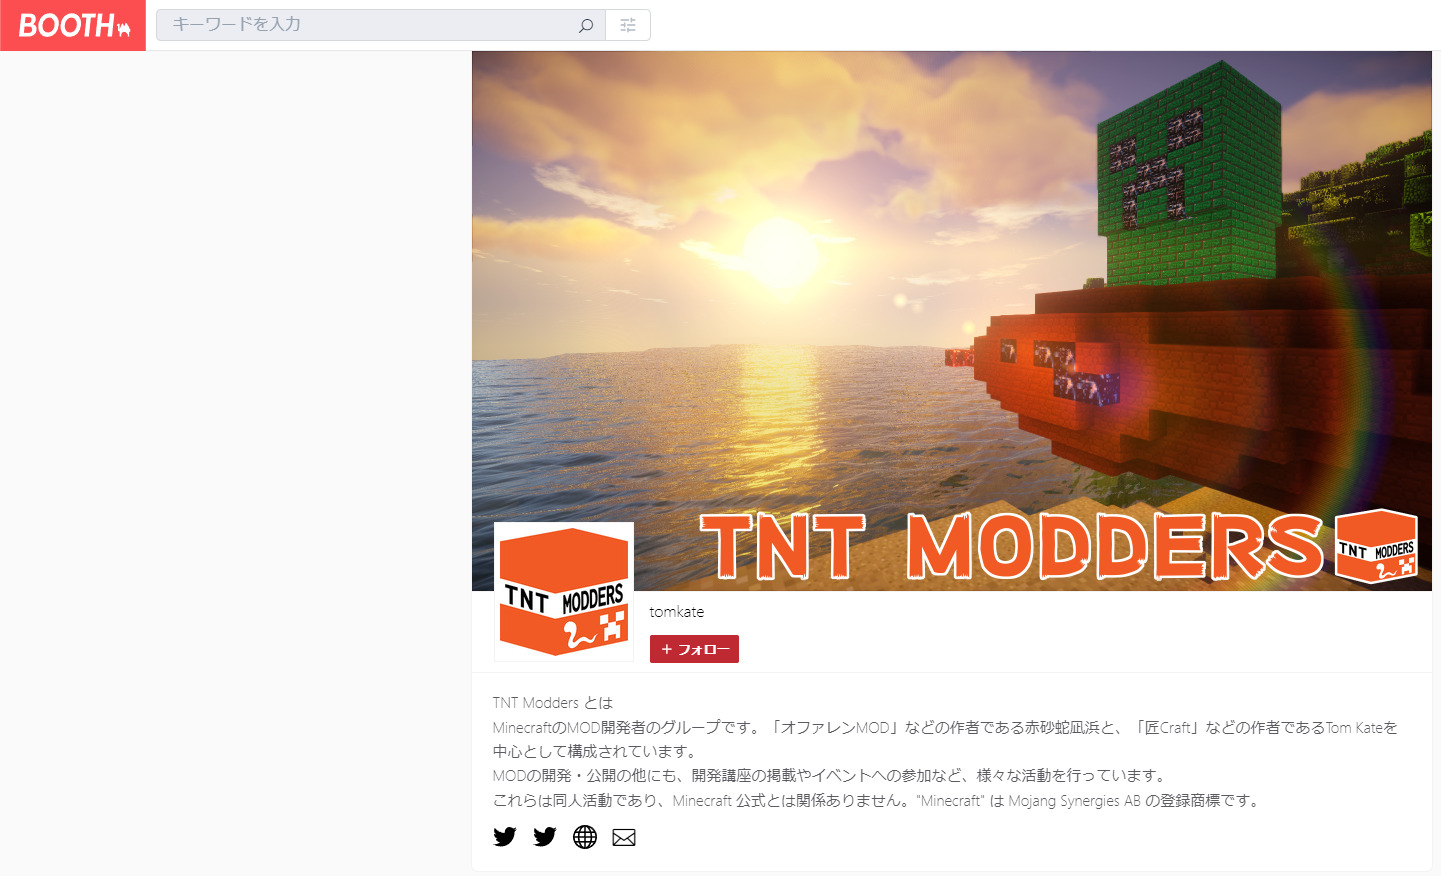 https://tntmodders.booth.pm/